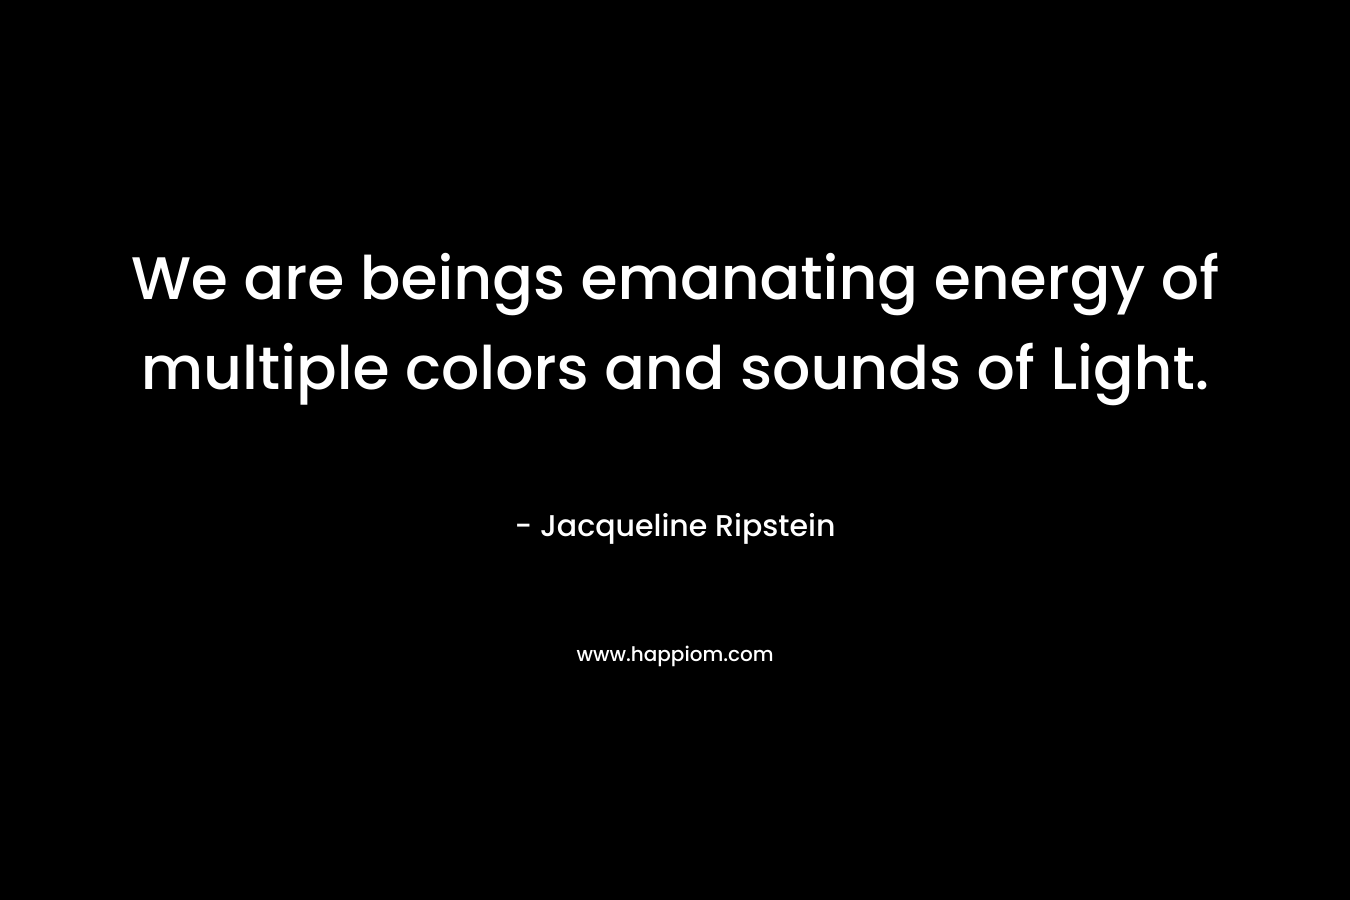 We are beings emanating energy of multiple colors and sounds of Light. – Jacqueline Ripstein